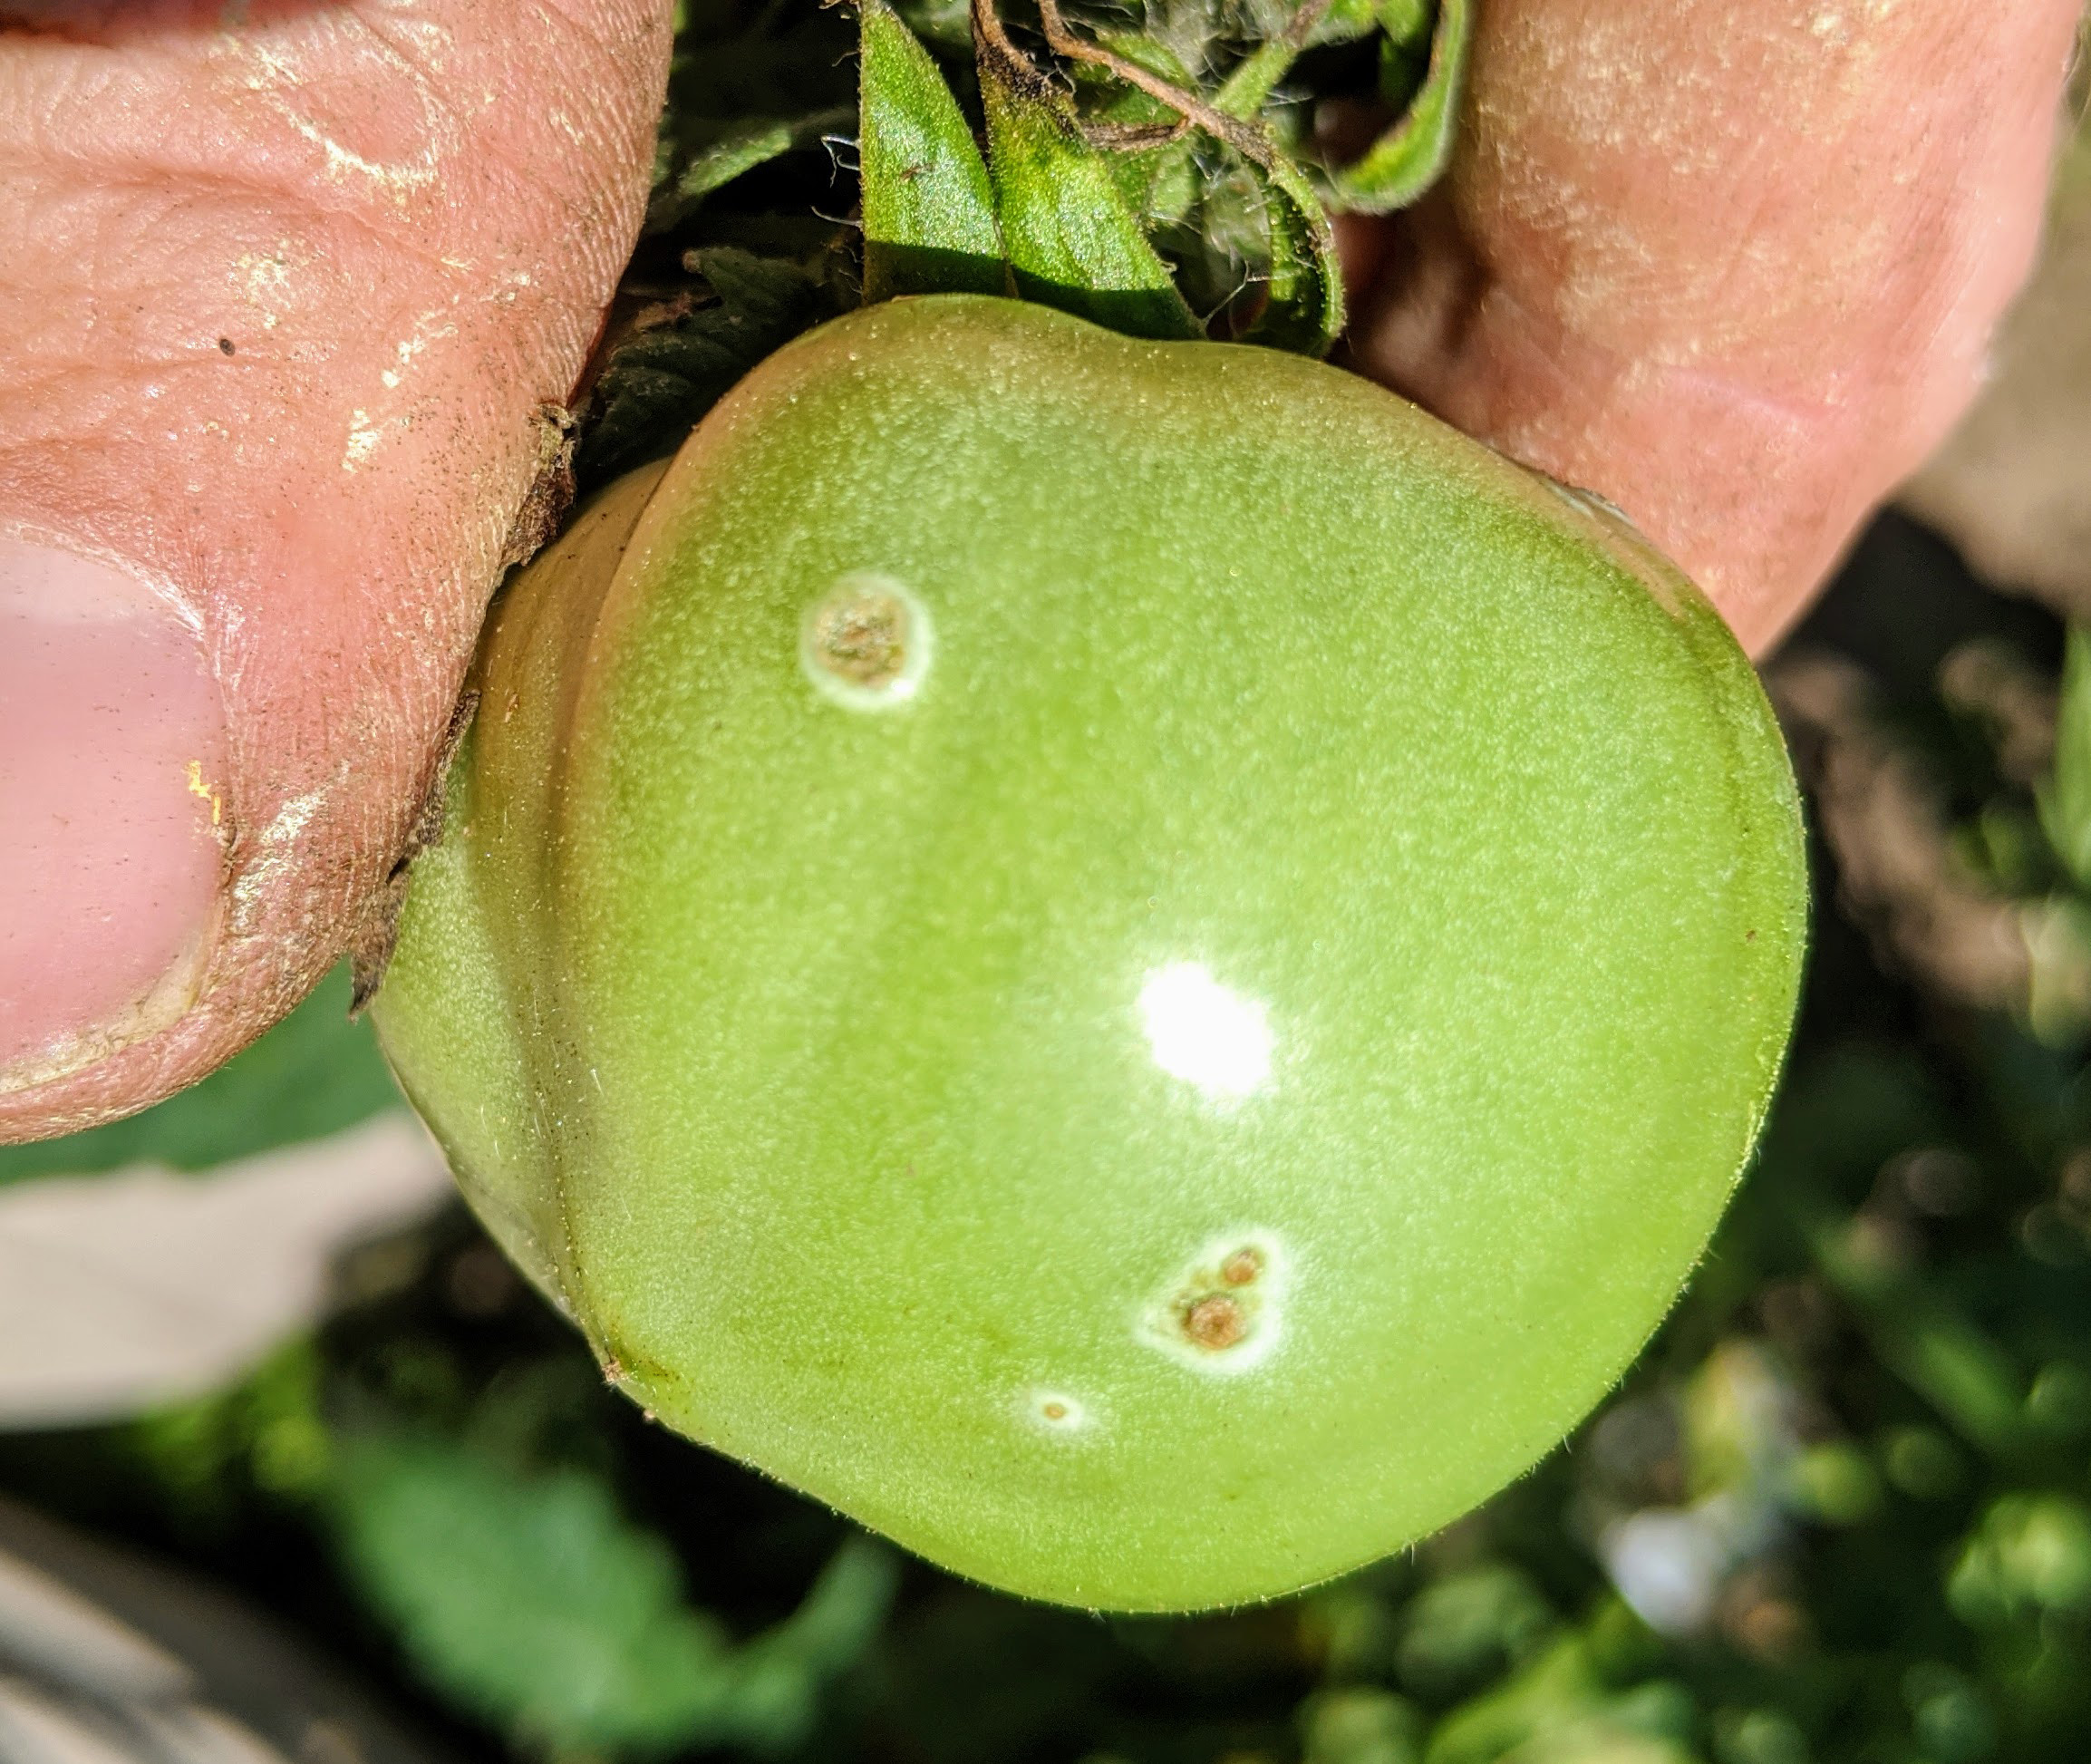 Bacterial canker symptoms on tomato fruit